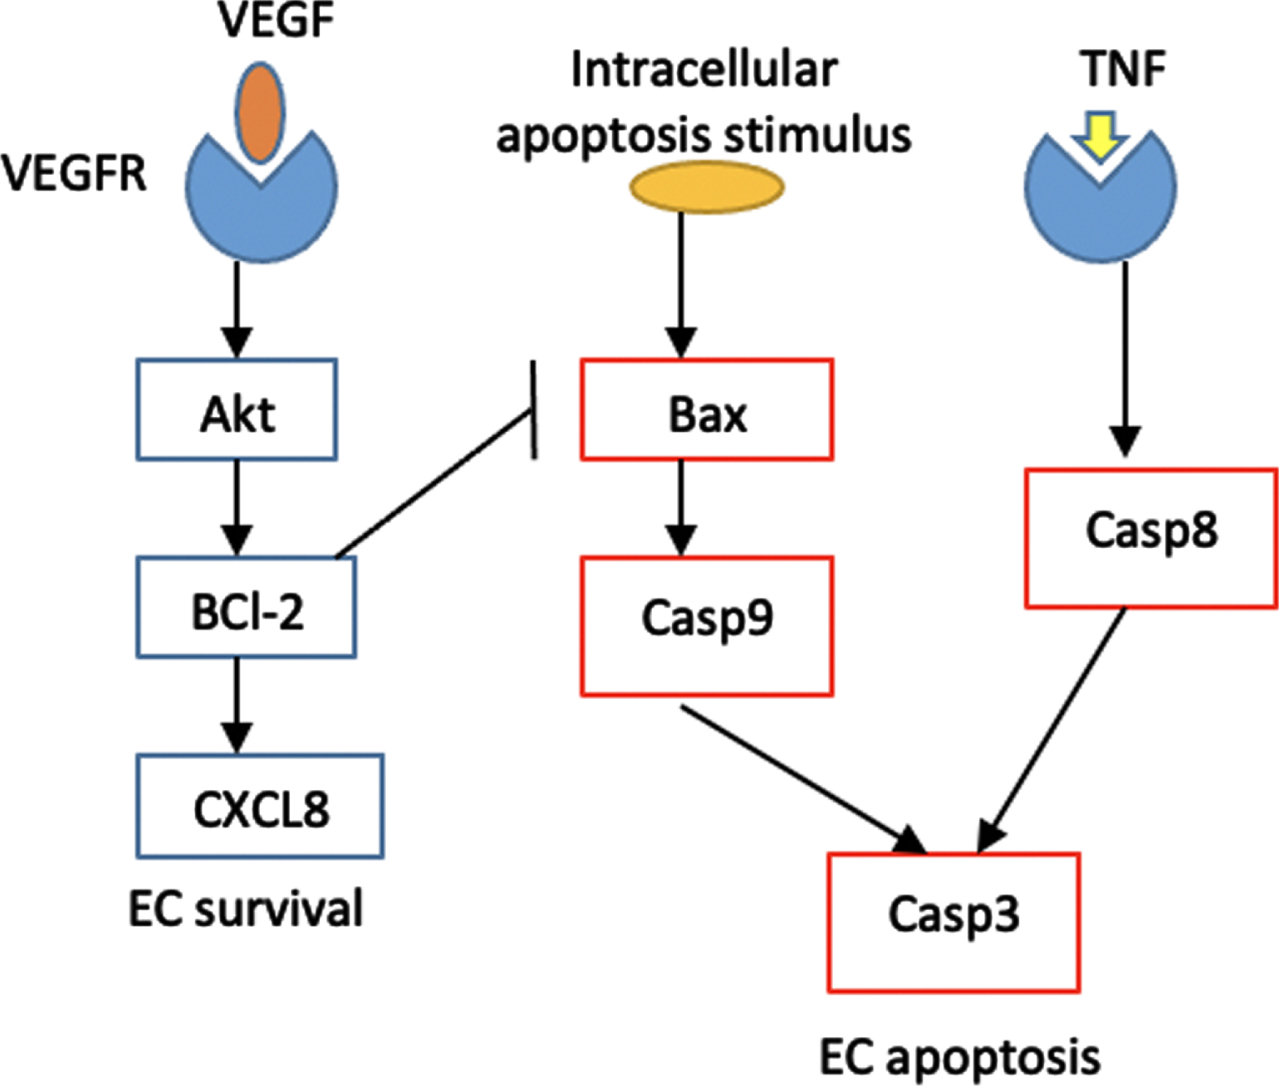 Schematic diagram of EC intracellular signaling. The proteins involved in apoptosis pathway are represented by red rectangles, while the ones involved in P13K/Akt pathway are represented by blue rectangles. The P13K/Akt terminates at the activation of CXCL8 proangiogenic protein that promotes cell survival, while the apoptosis pathway leads to EC apoptosis.